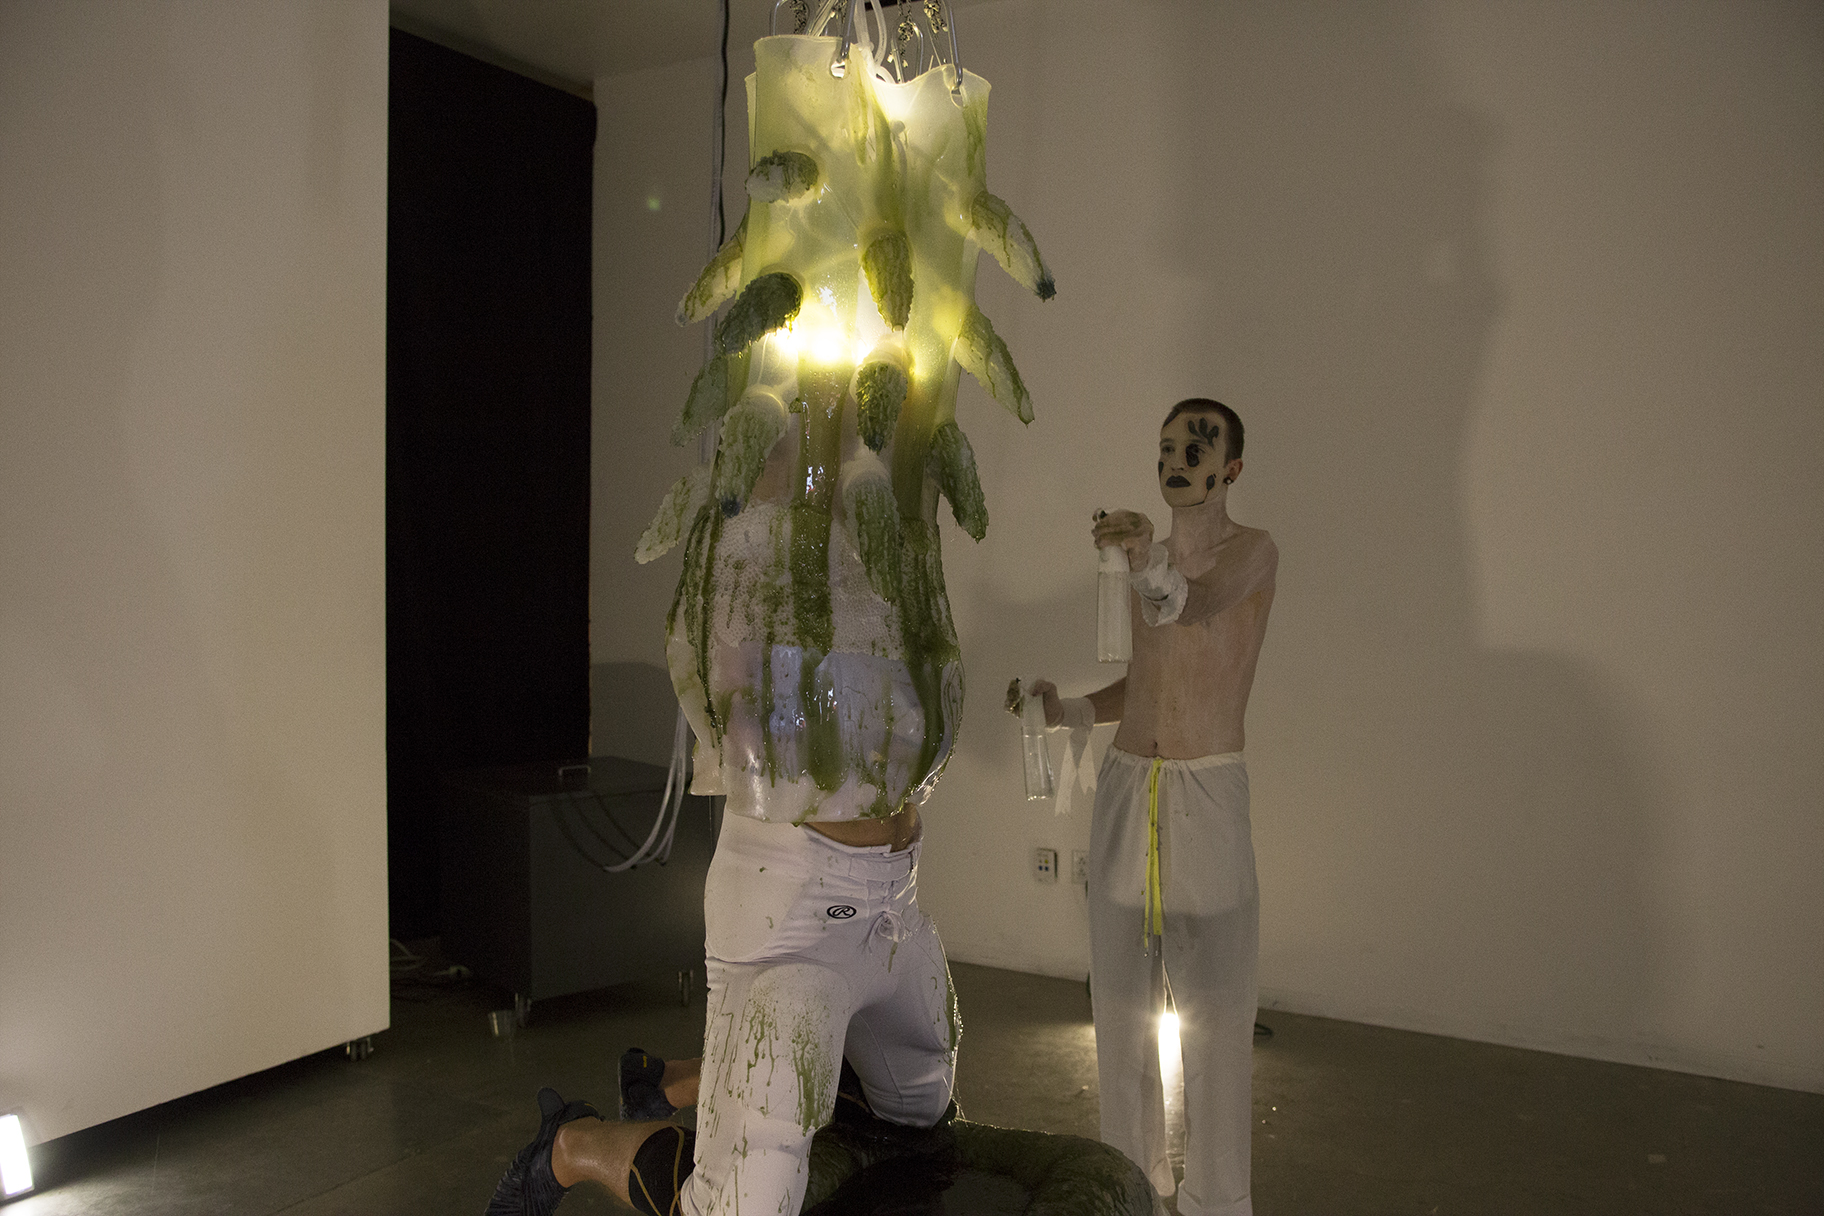 A man engulfed in a gelatenous form covered in tentacles knealing over a pool of green slime while a shirtless man painted in white sprays him with moisture